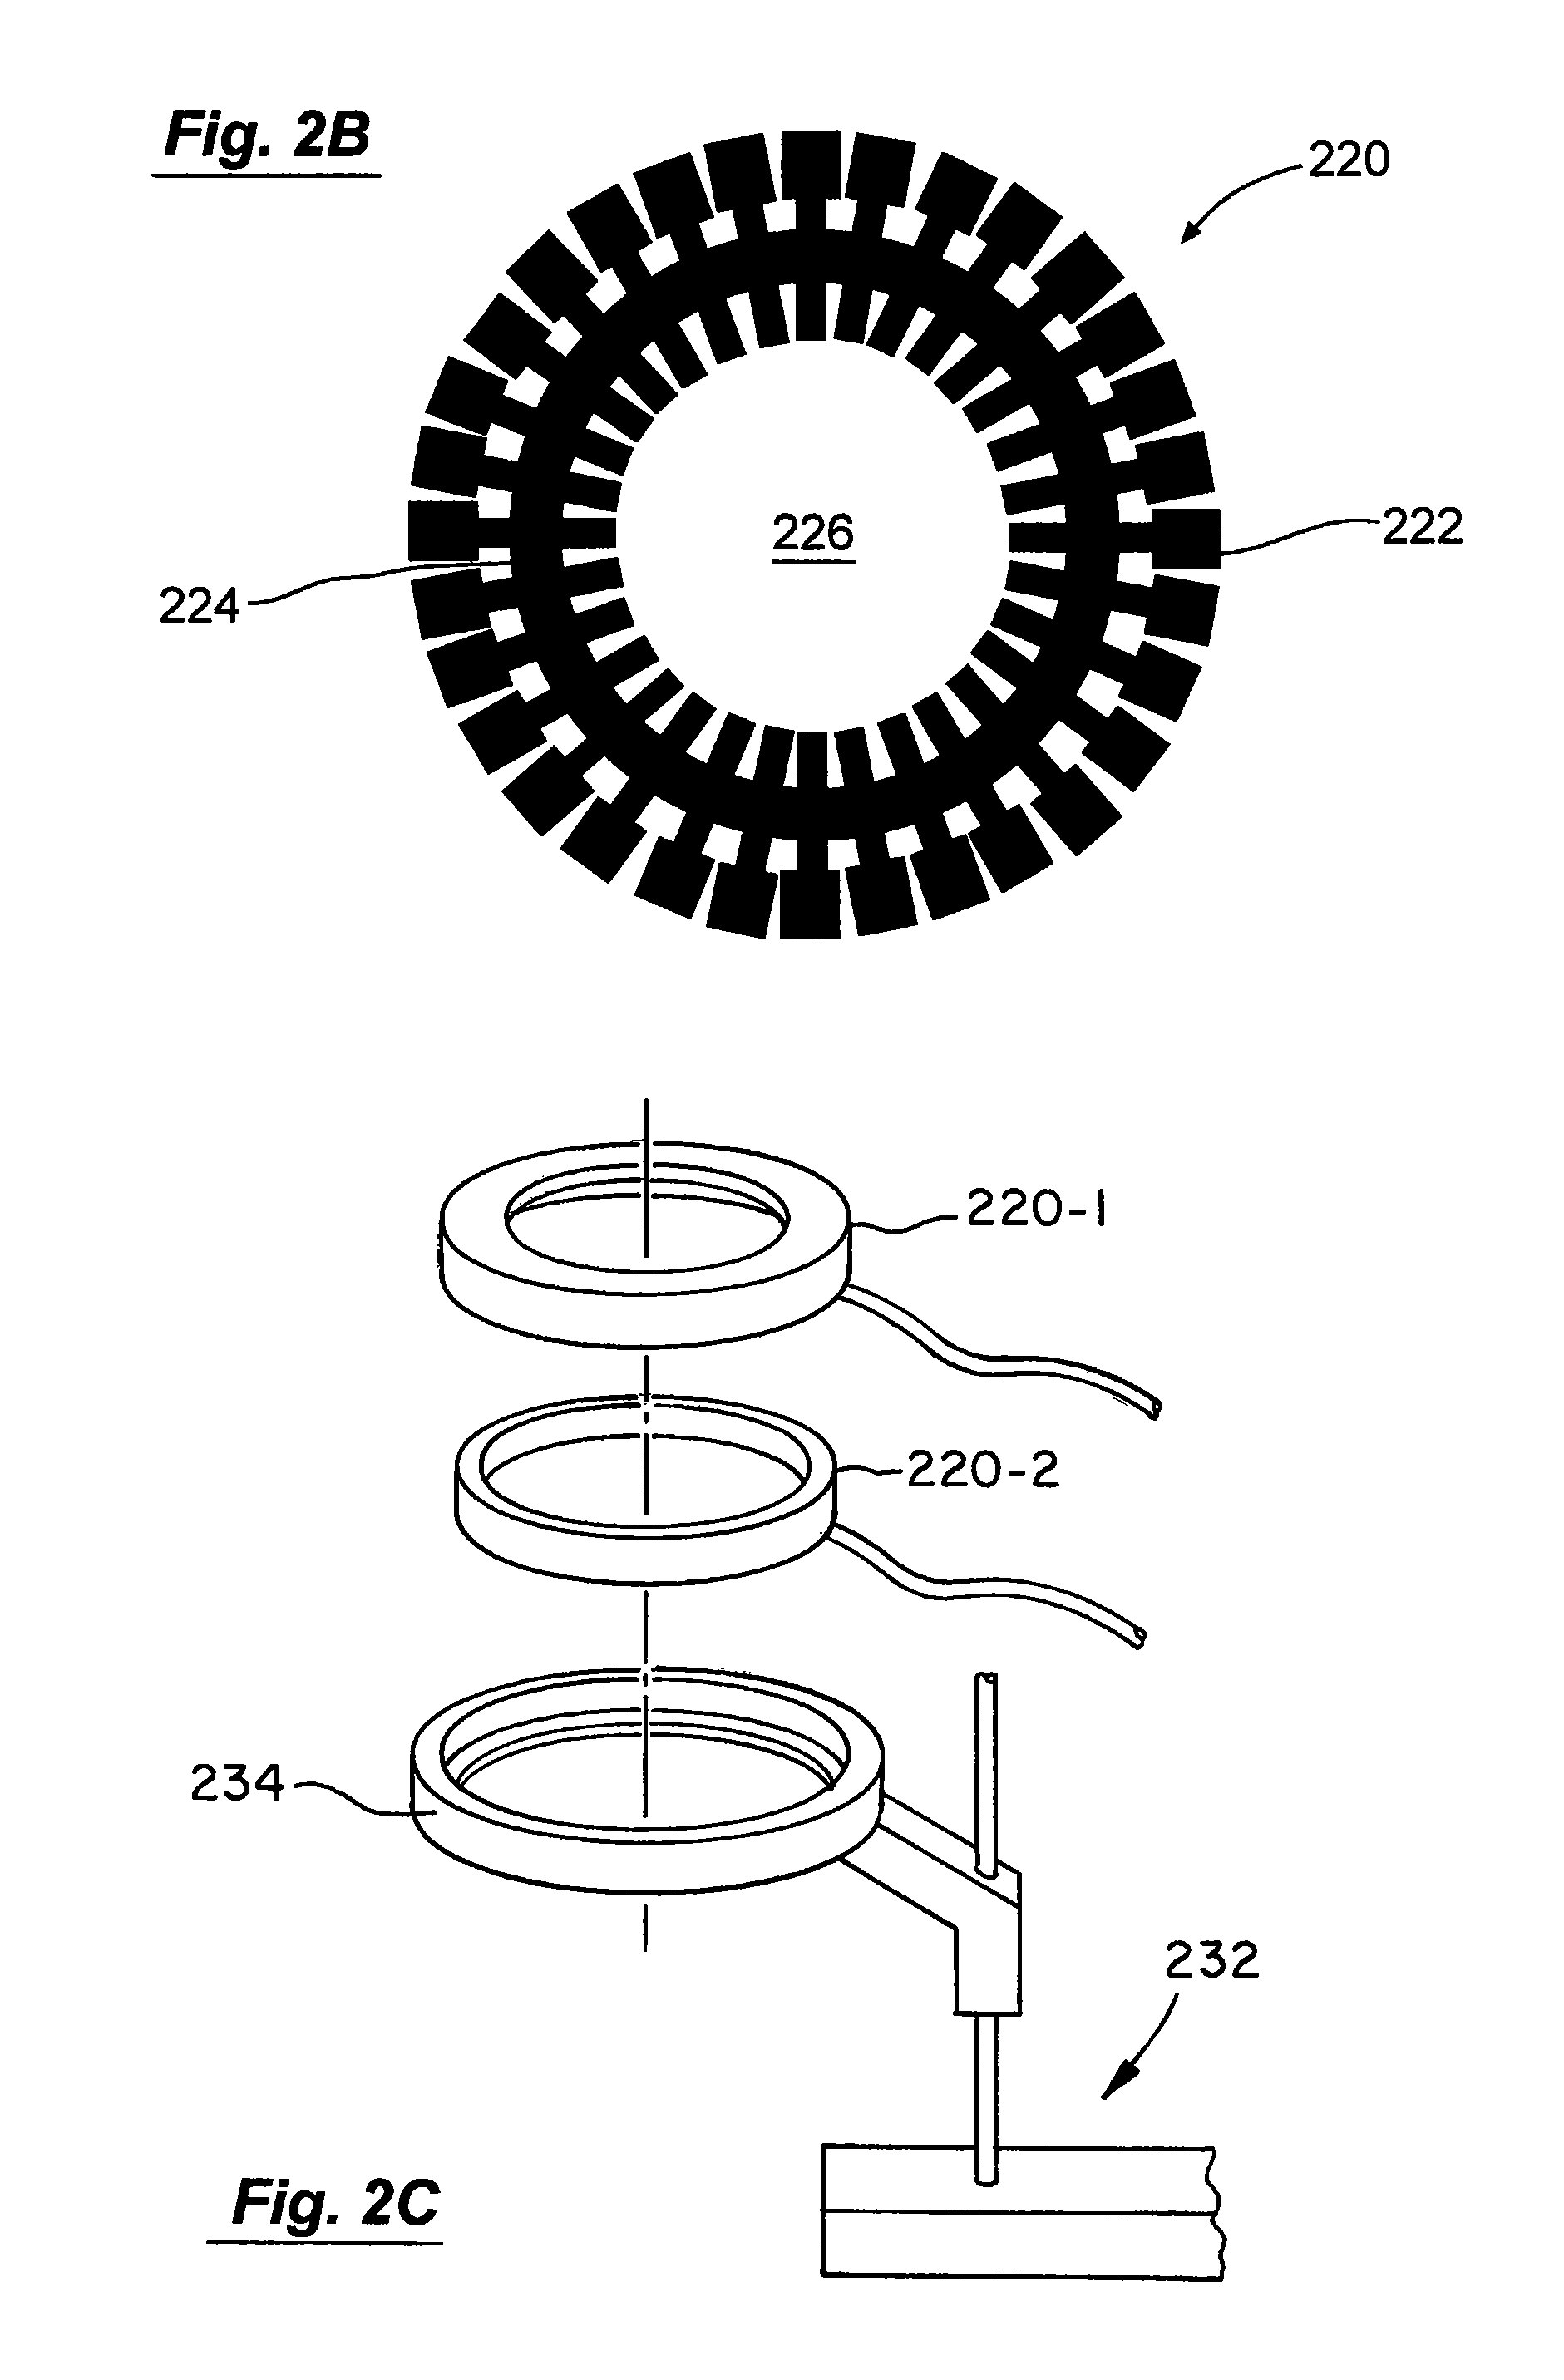 Method and apparatus for combined diagnostic and therapeutic ultrasound system incorporating noninvasive thermometry, ablation control and automation